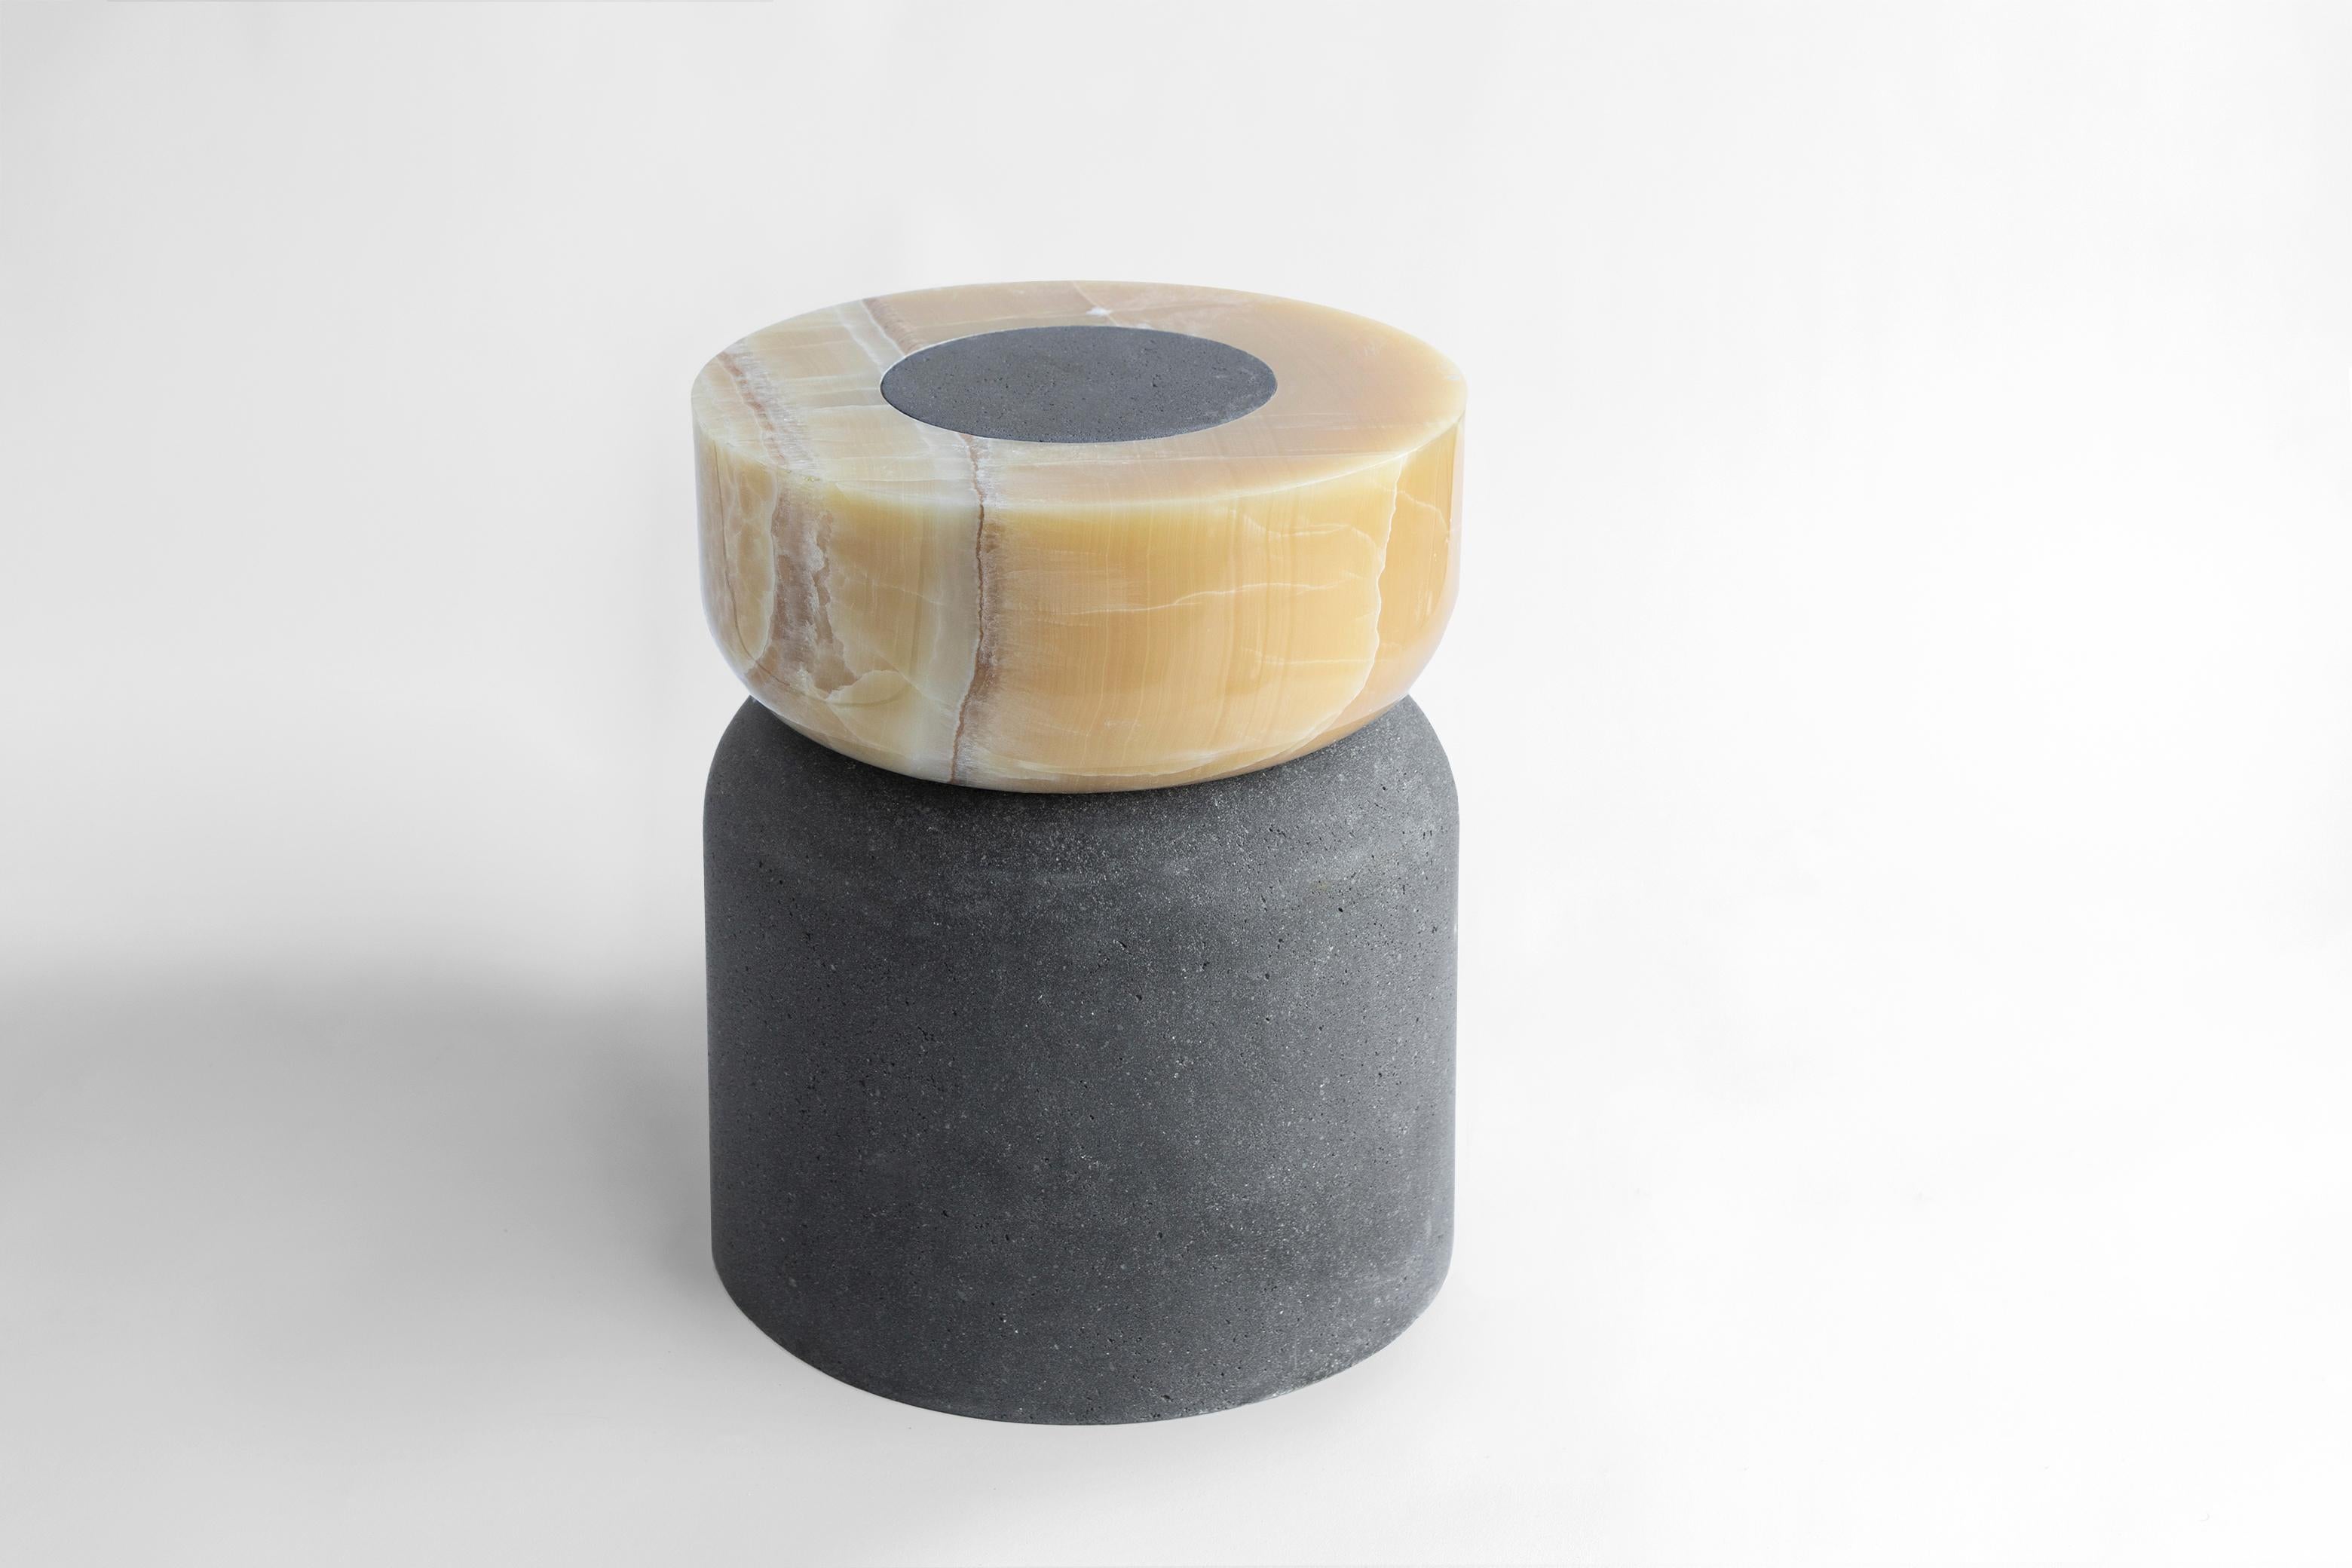 Stone Volcanic Shade IV Stool/Table by Sten Studio, Represented by Tuleste Factory For Sale